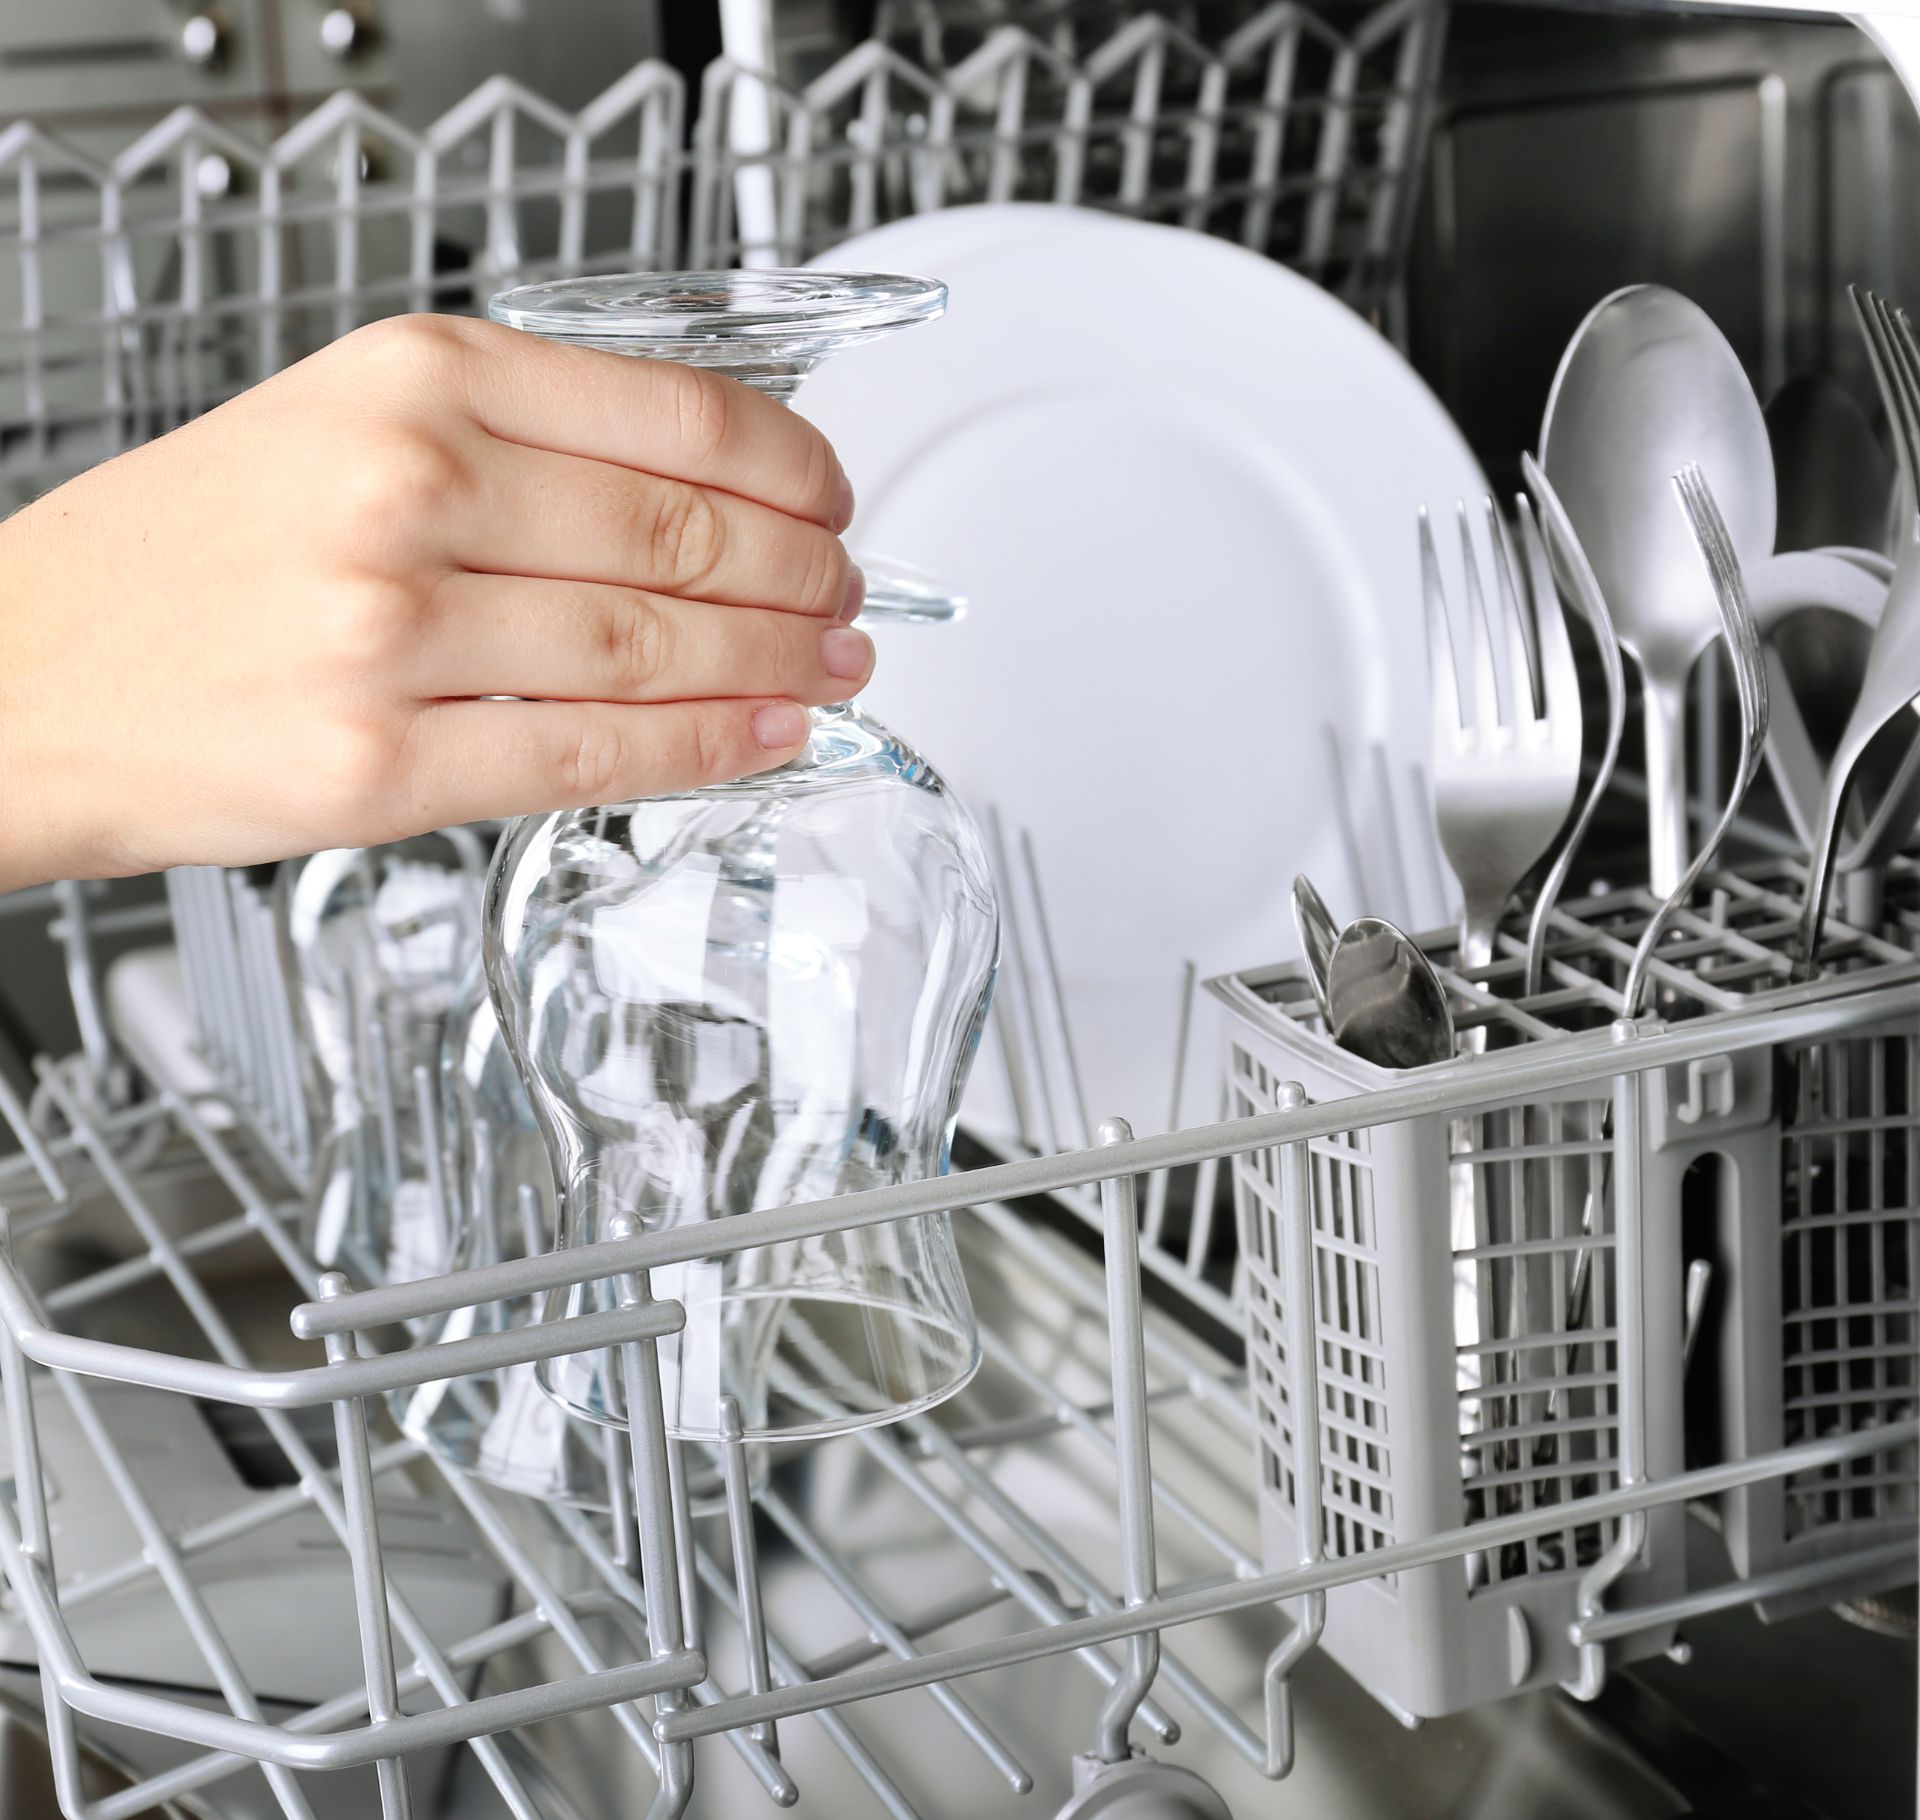 Potential Causes of a Dishwasher That Won't Drain